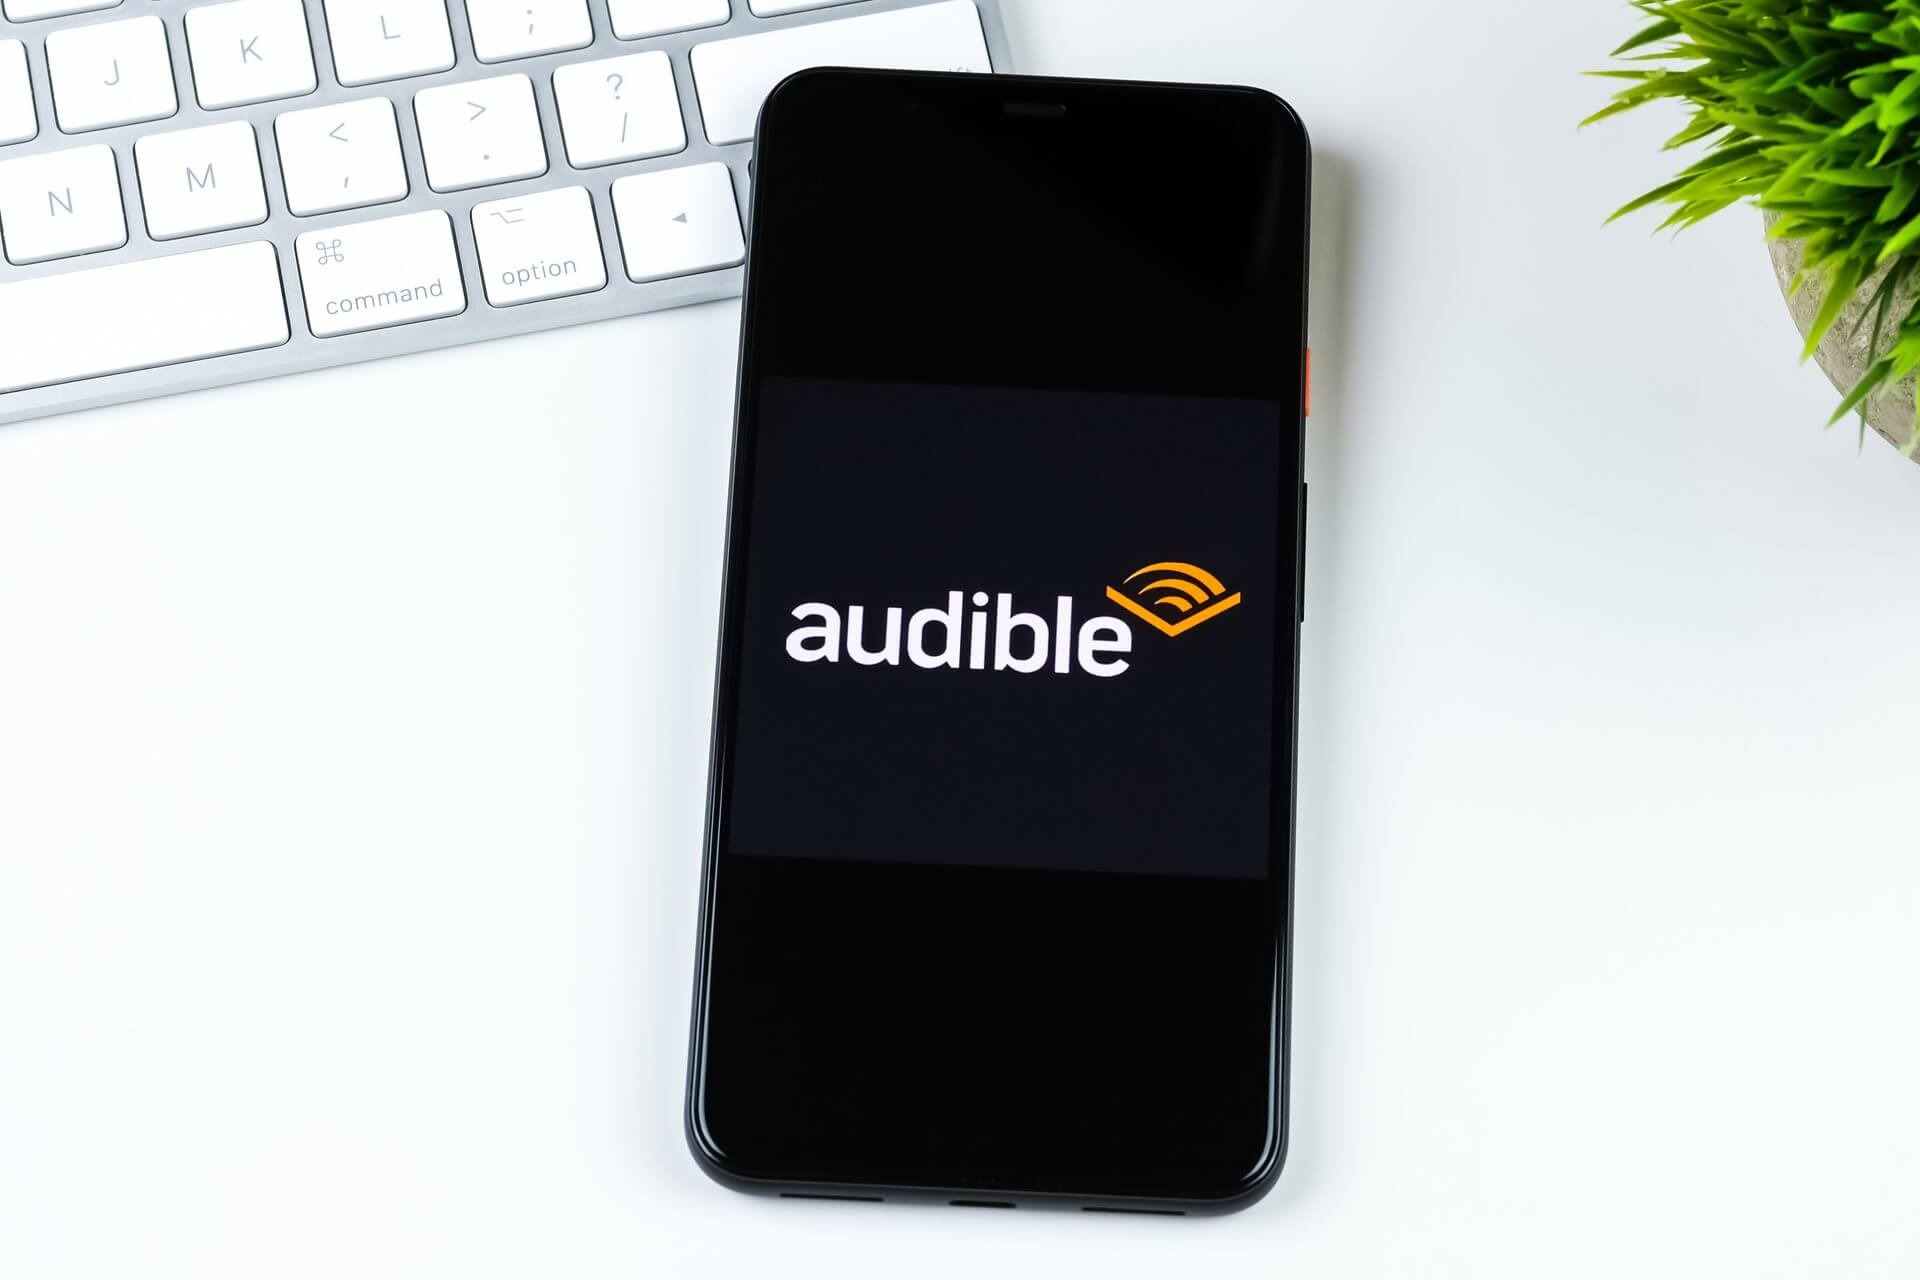 How Do I Sign Up For Audible